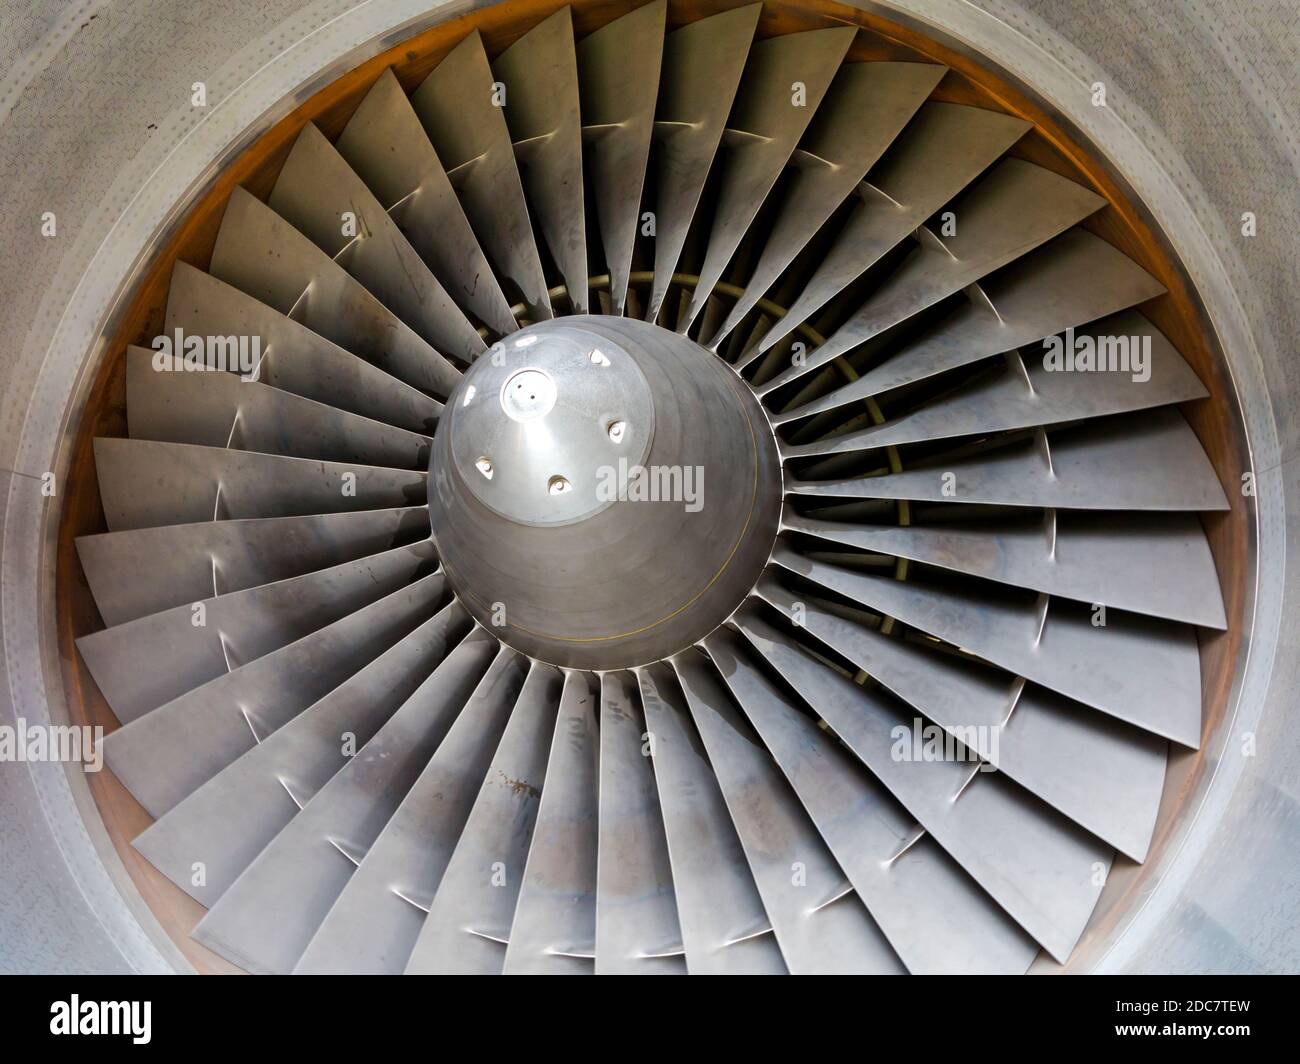 Detail of metal blades on a jet aircraft engine. Stock Photo